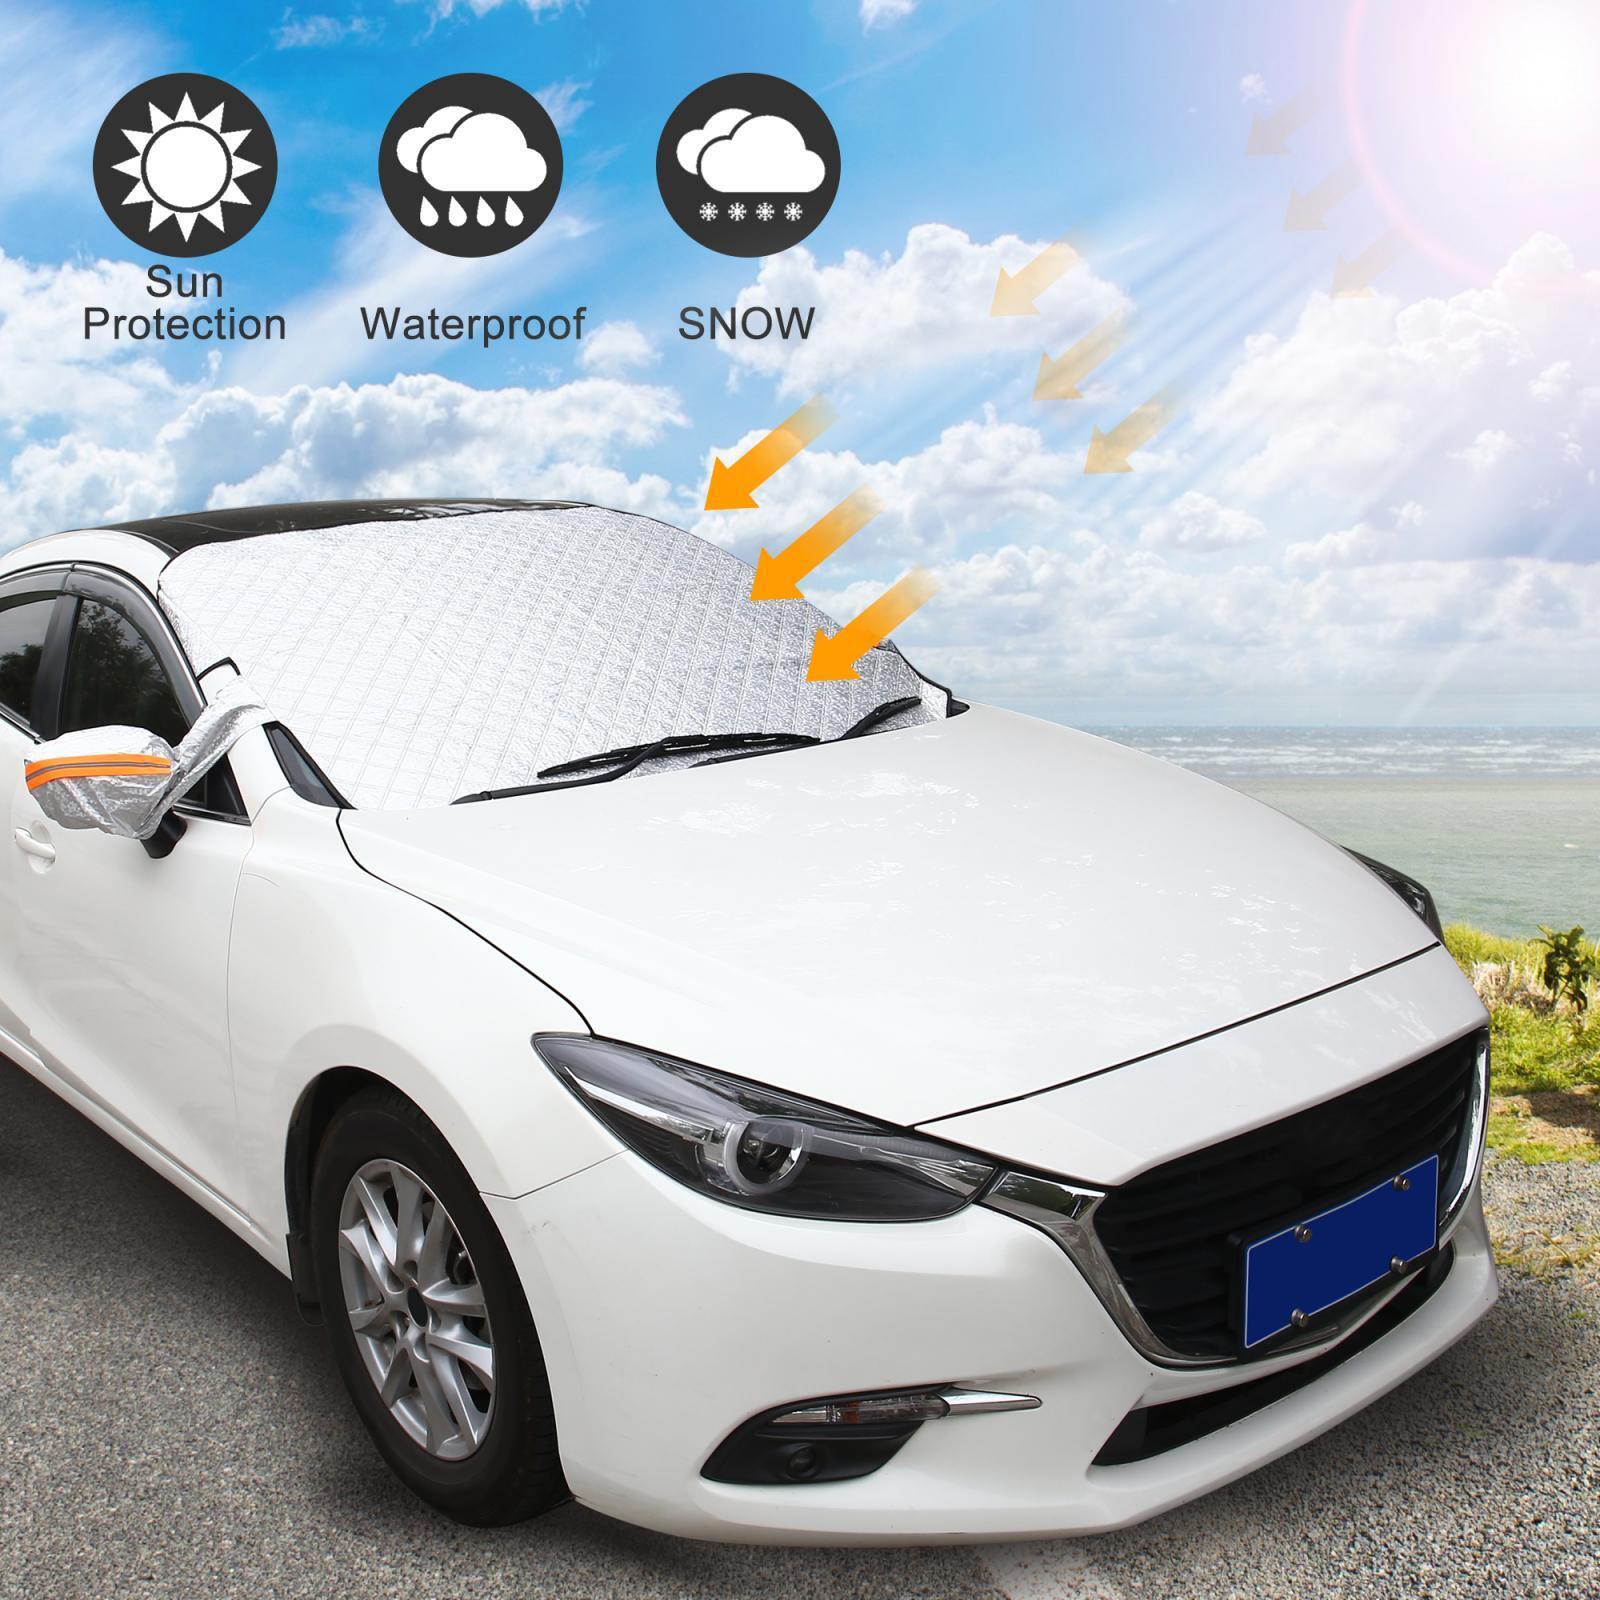 Windshield Ice Snow Cover Universal 4 Layer with Reflective Strips for Cars SUVs